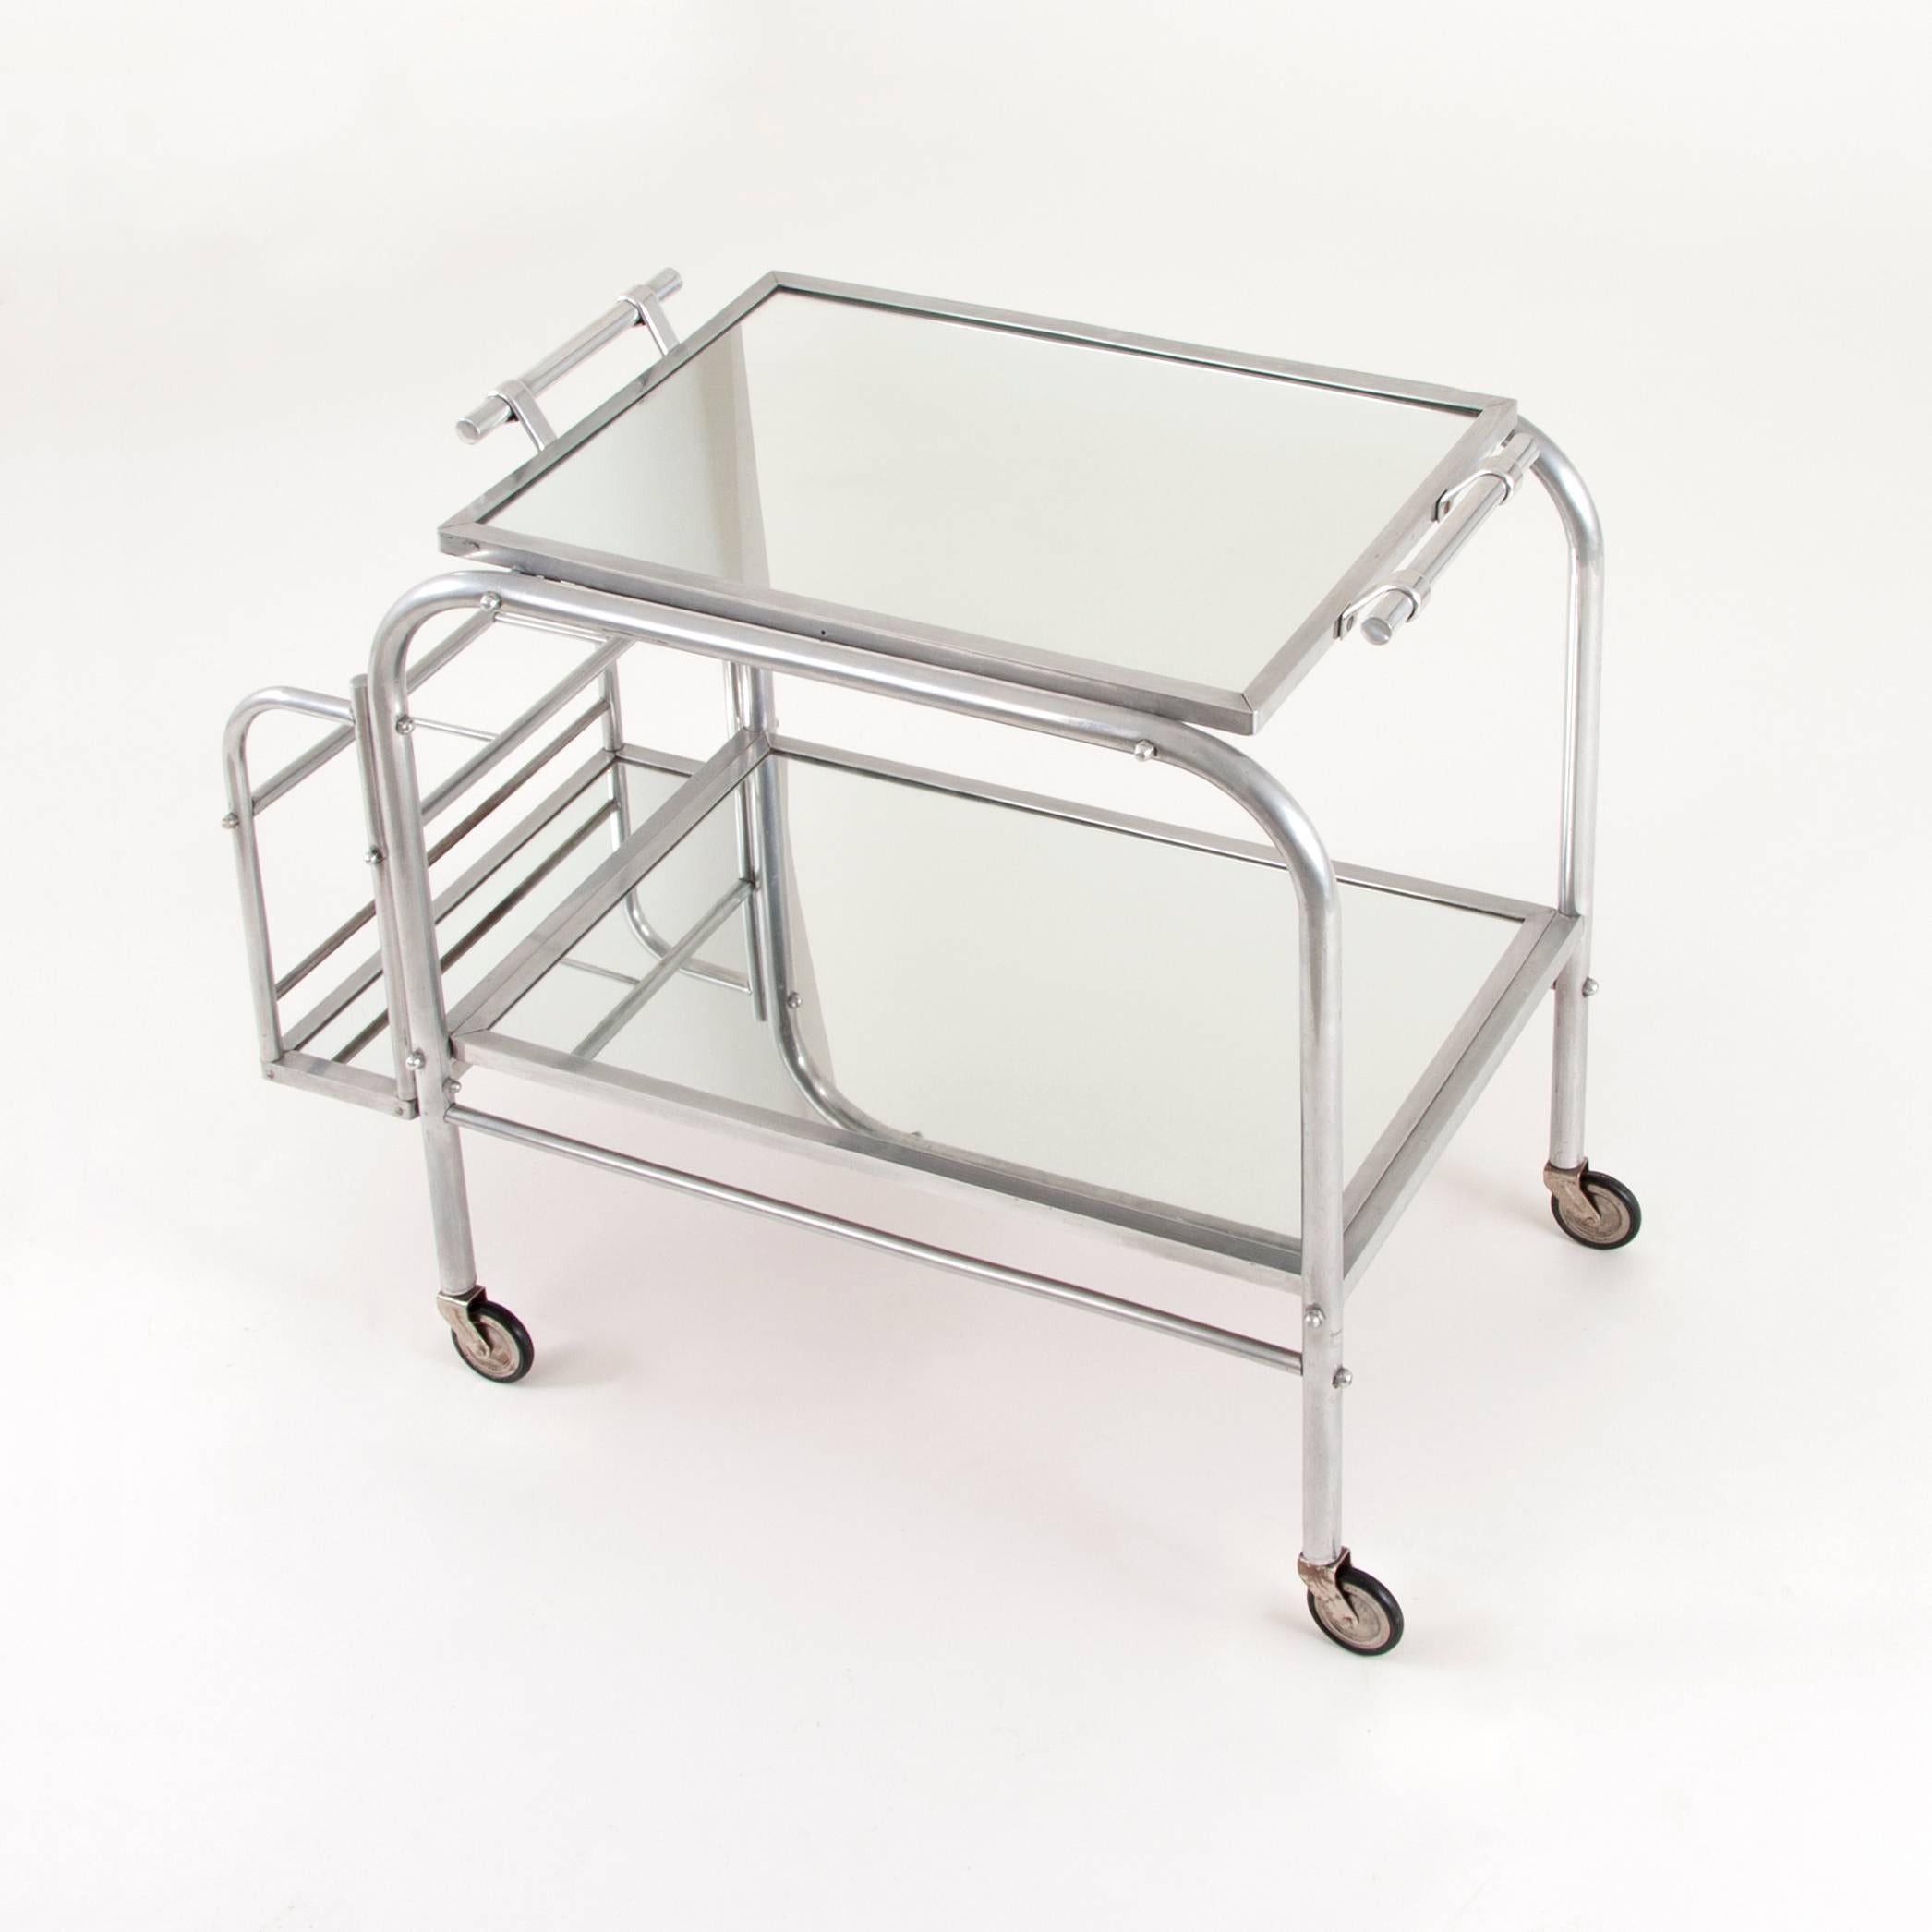 Mid-20th Century Art Deco Serving Bar Cart with Mirror Tray, Jacques Adnet Attributed, France